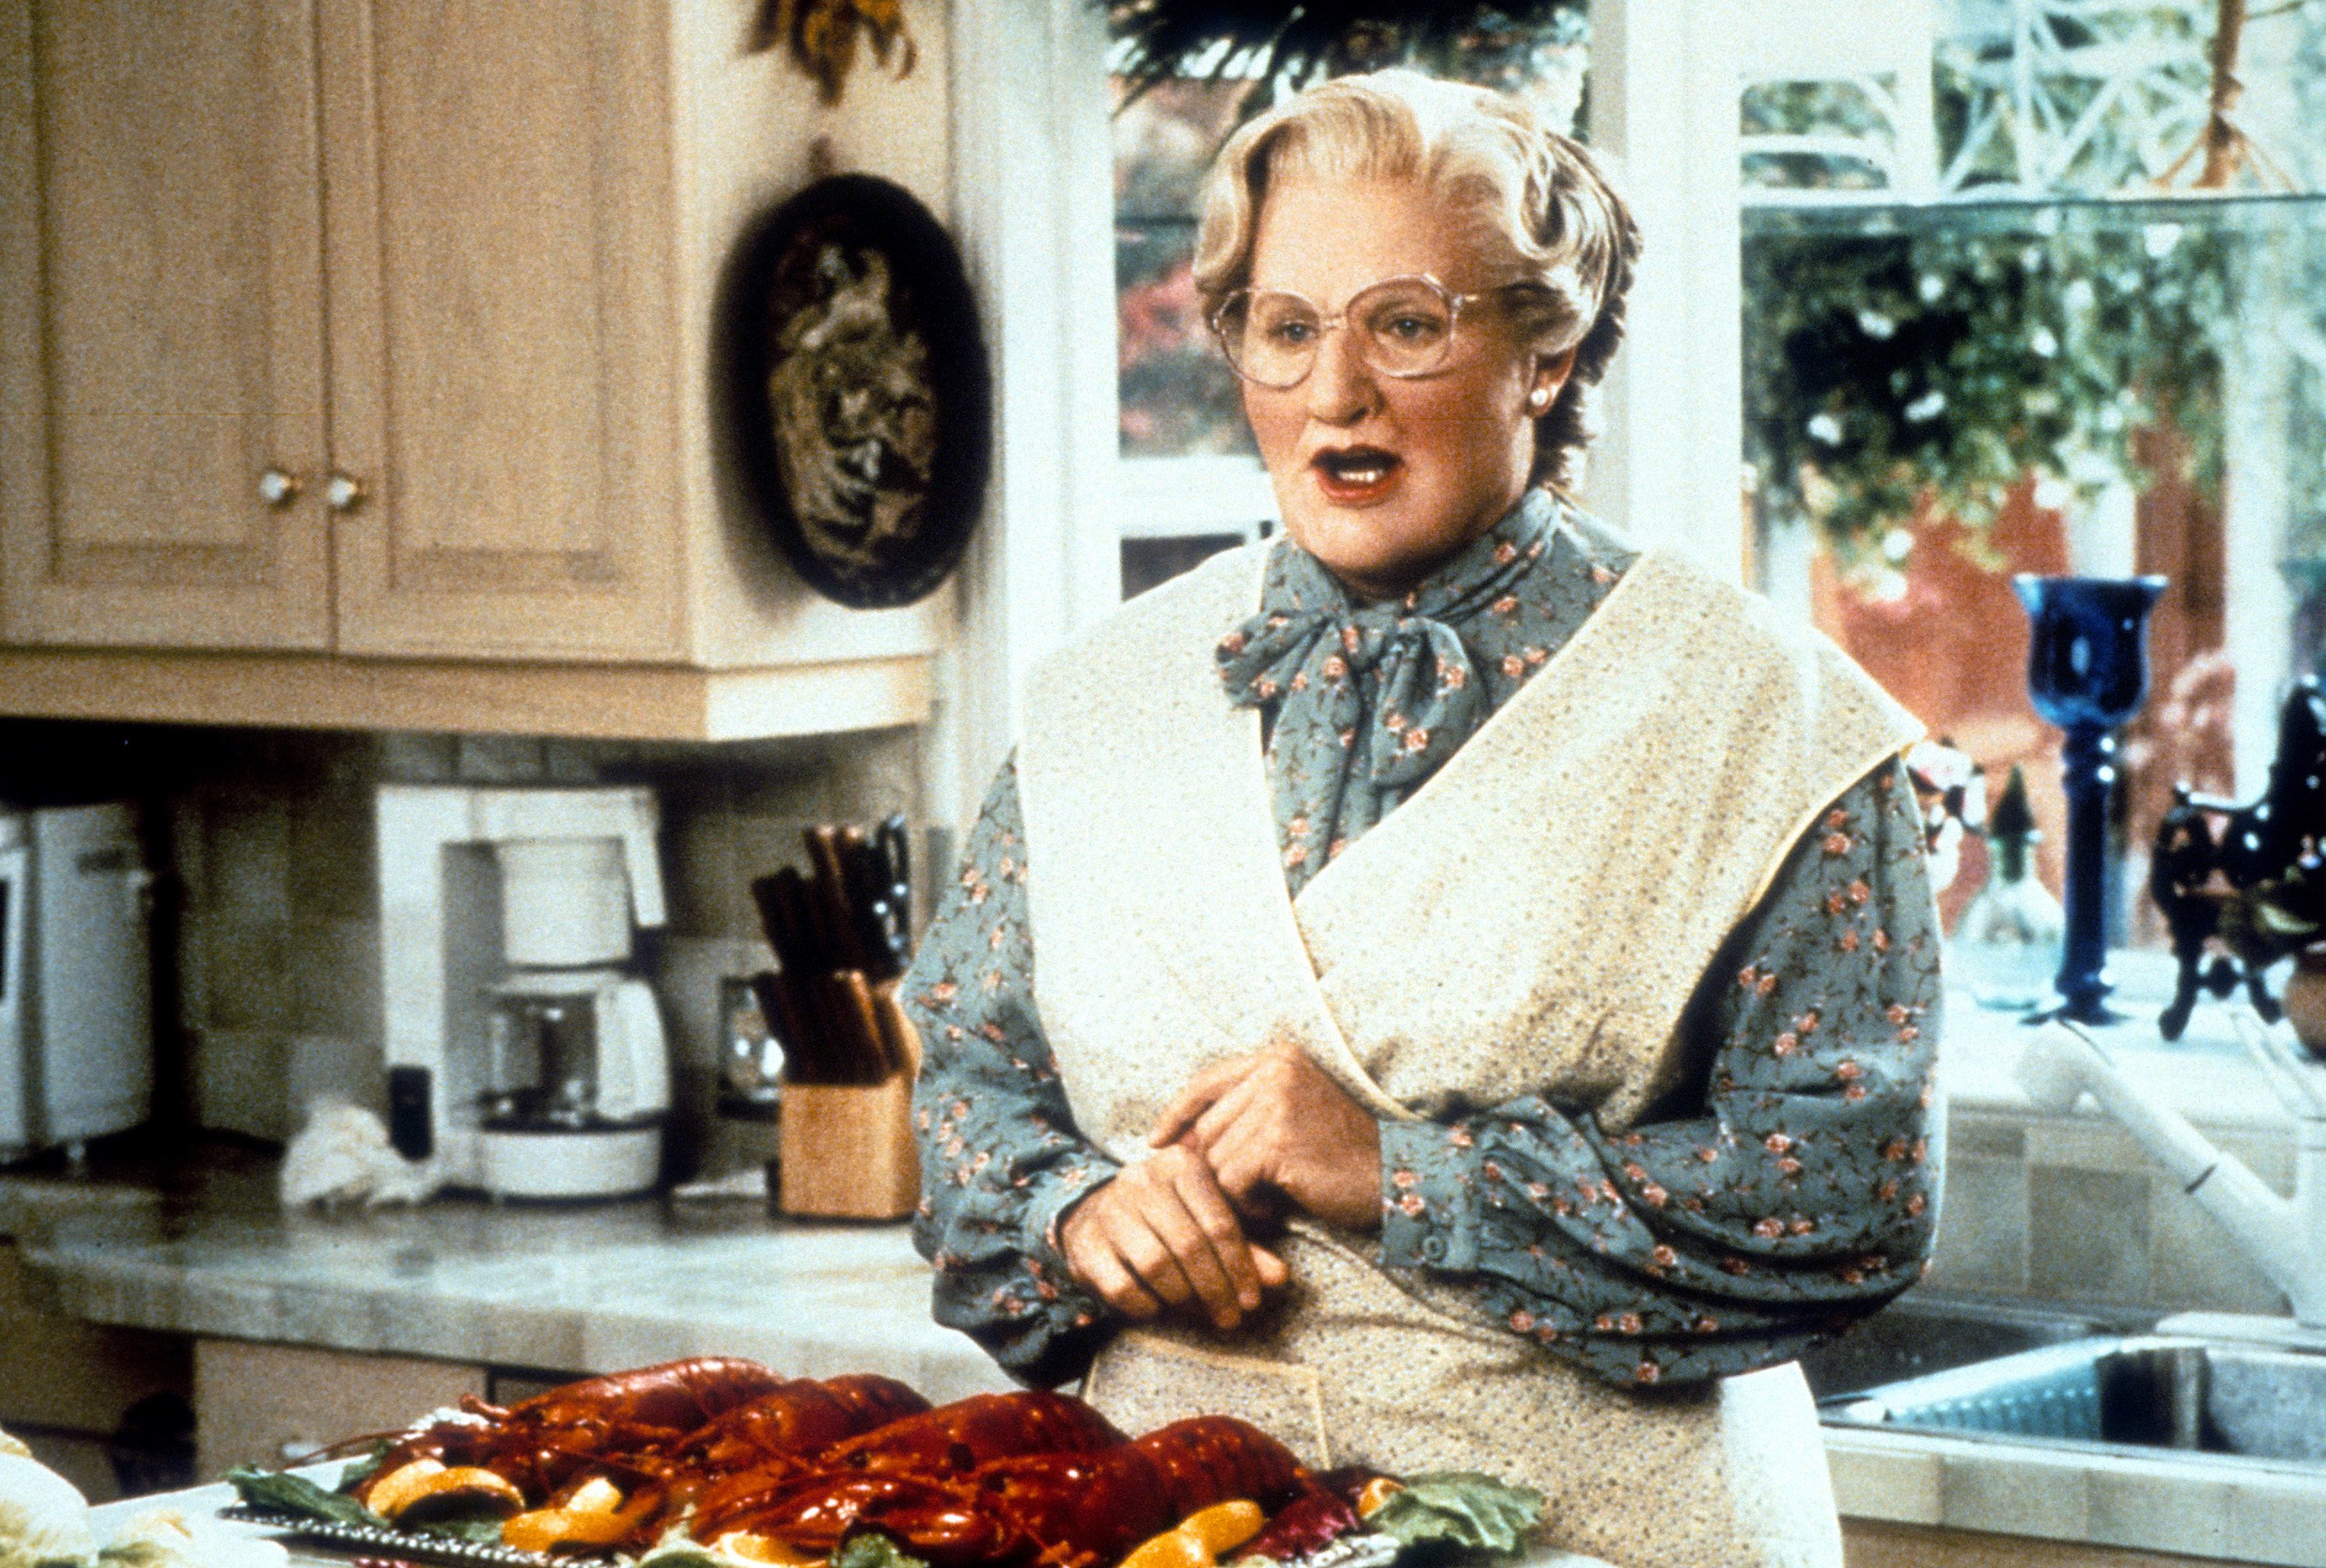 Robin Williams in the kitchen in a scene from the film 'Mrs. Doubtfire'